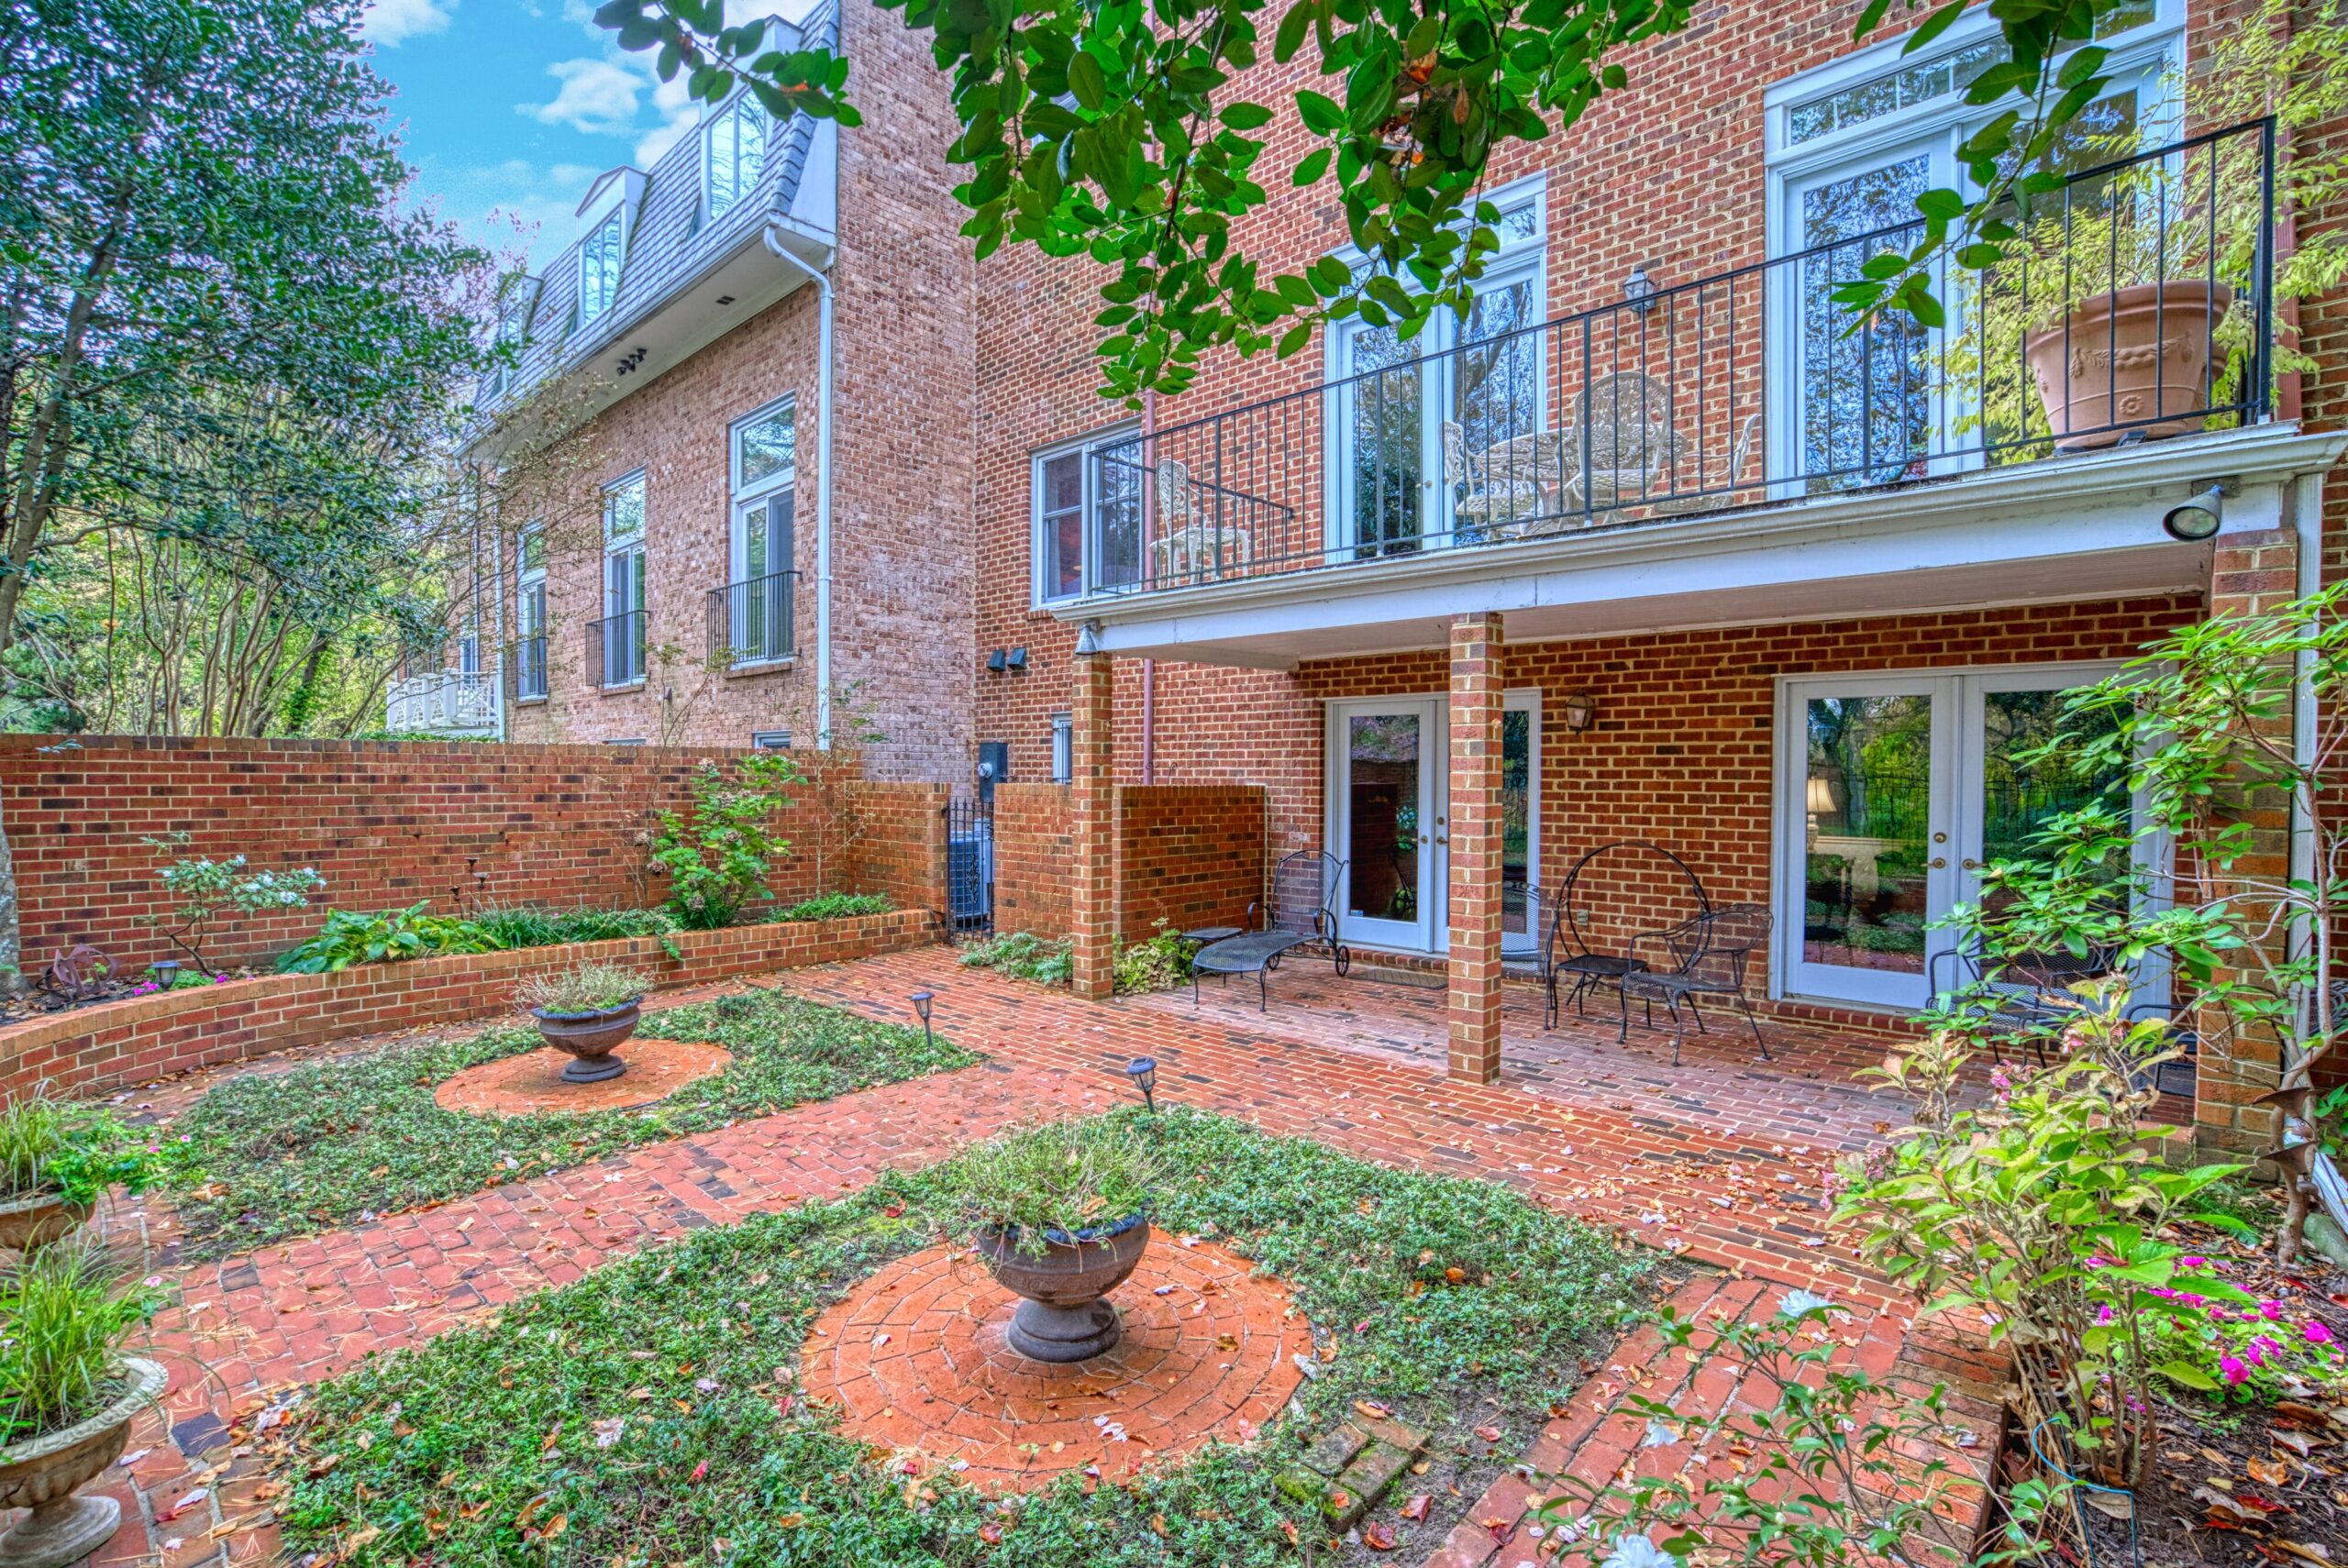 Exterior professional photo of 1324 Skipwith Road - showing rear exterior from the right angle. Brick paths with 2 landscaped ivy patches, covered brick patio and balcony